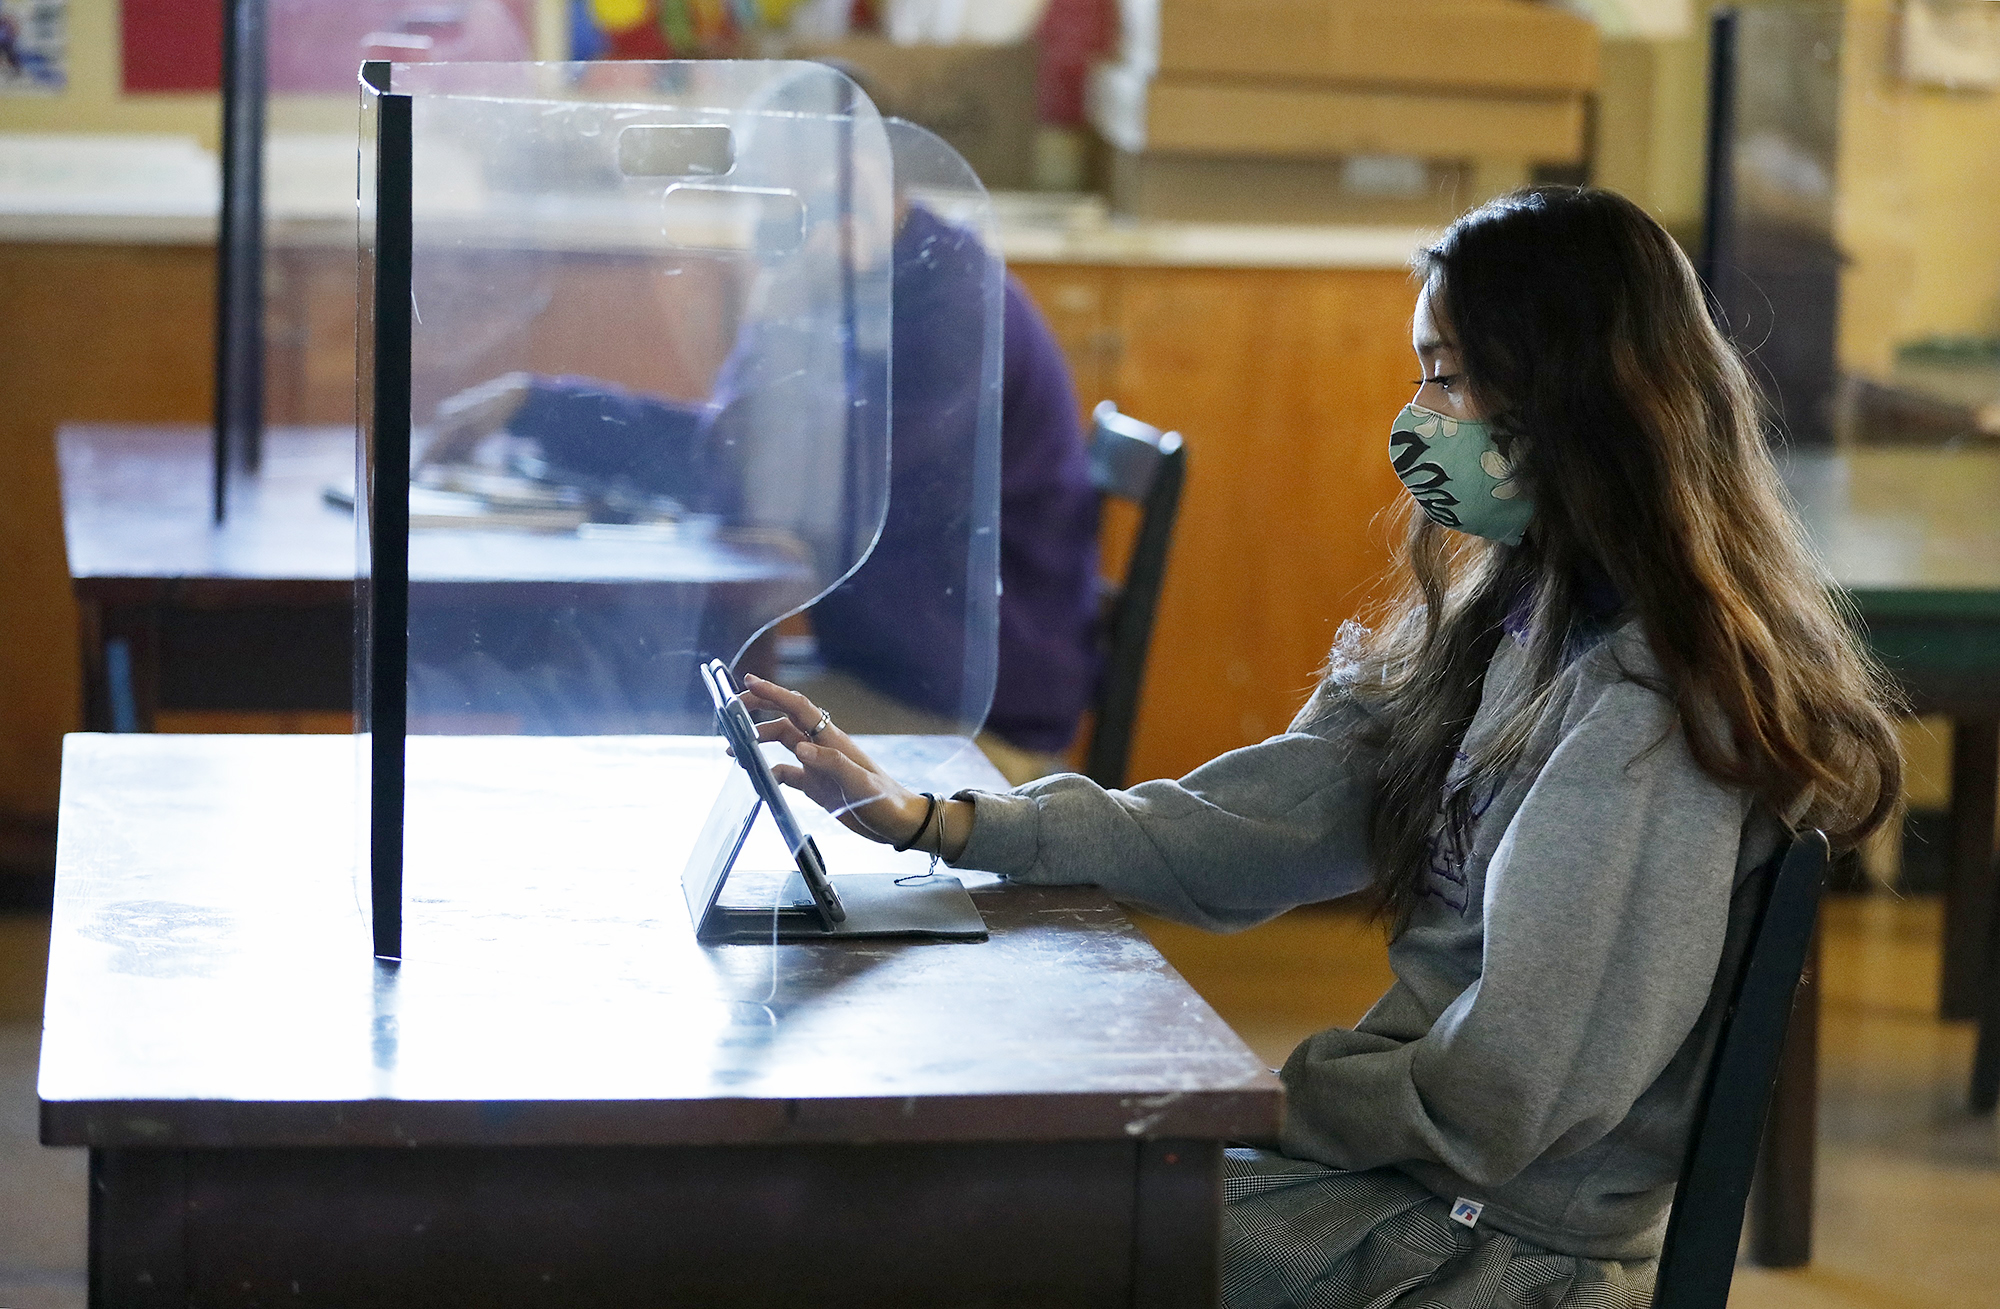 PHOTO: Senior student Ariana Diaz works with a plexiglass barrier in the art classroom as students return to in-person instruction in Long Beach, Calif., March 24, 2021.